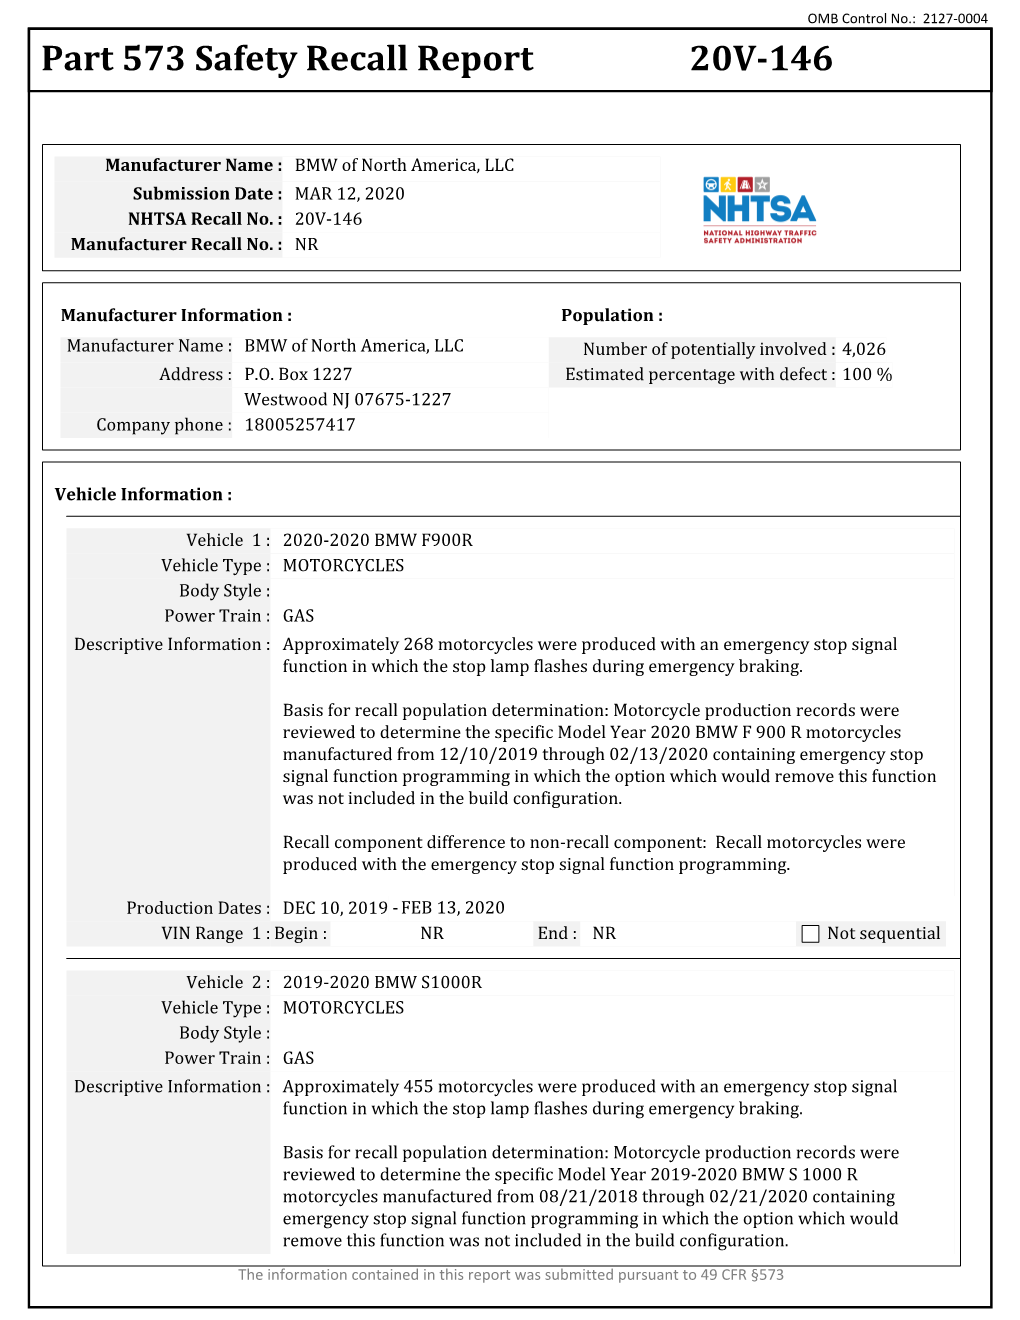 Part 573 Safety Recall Report 20V-146